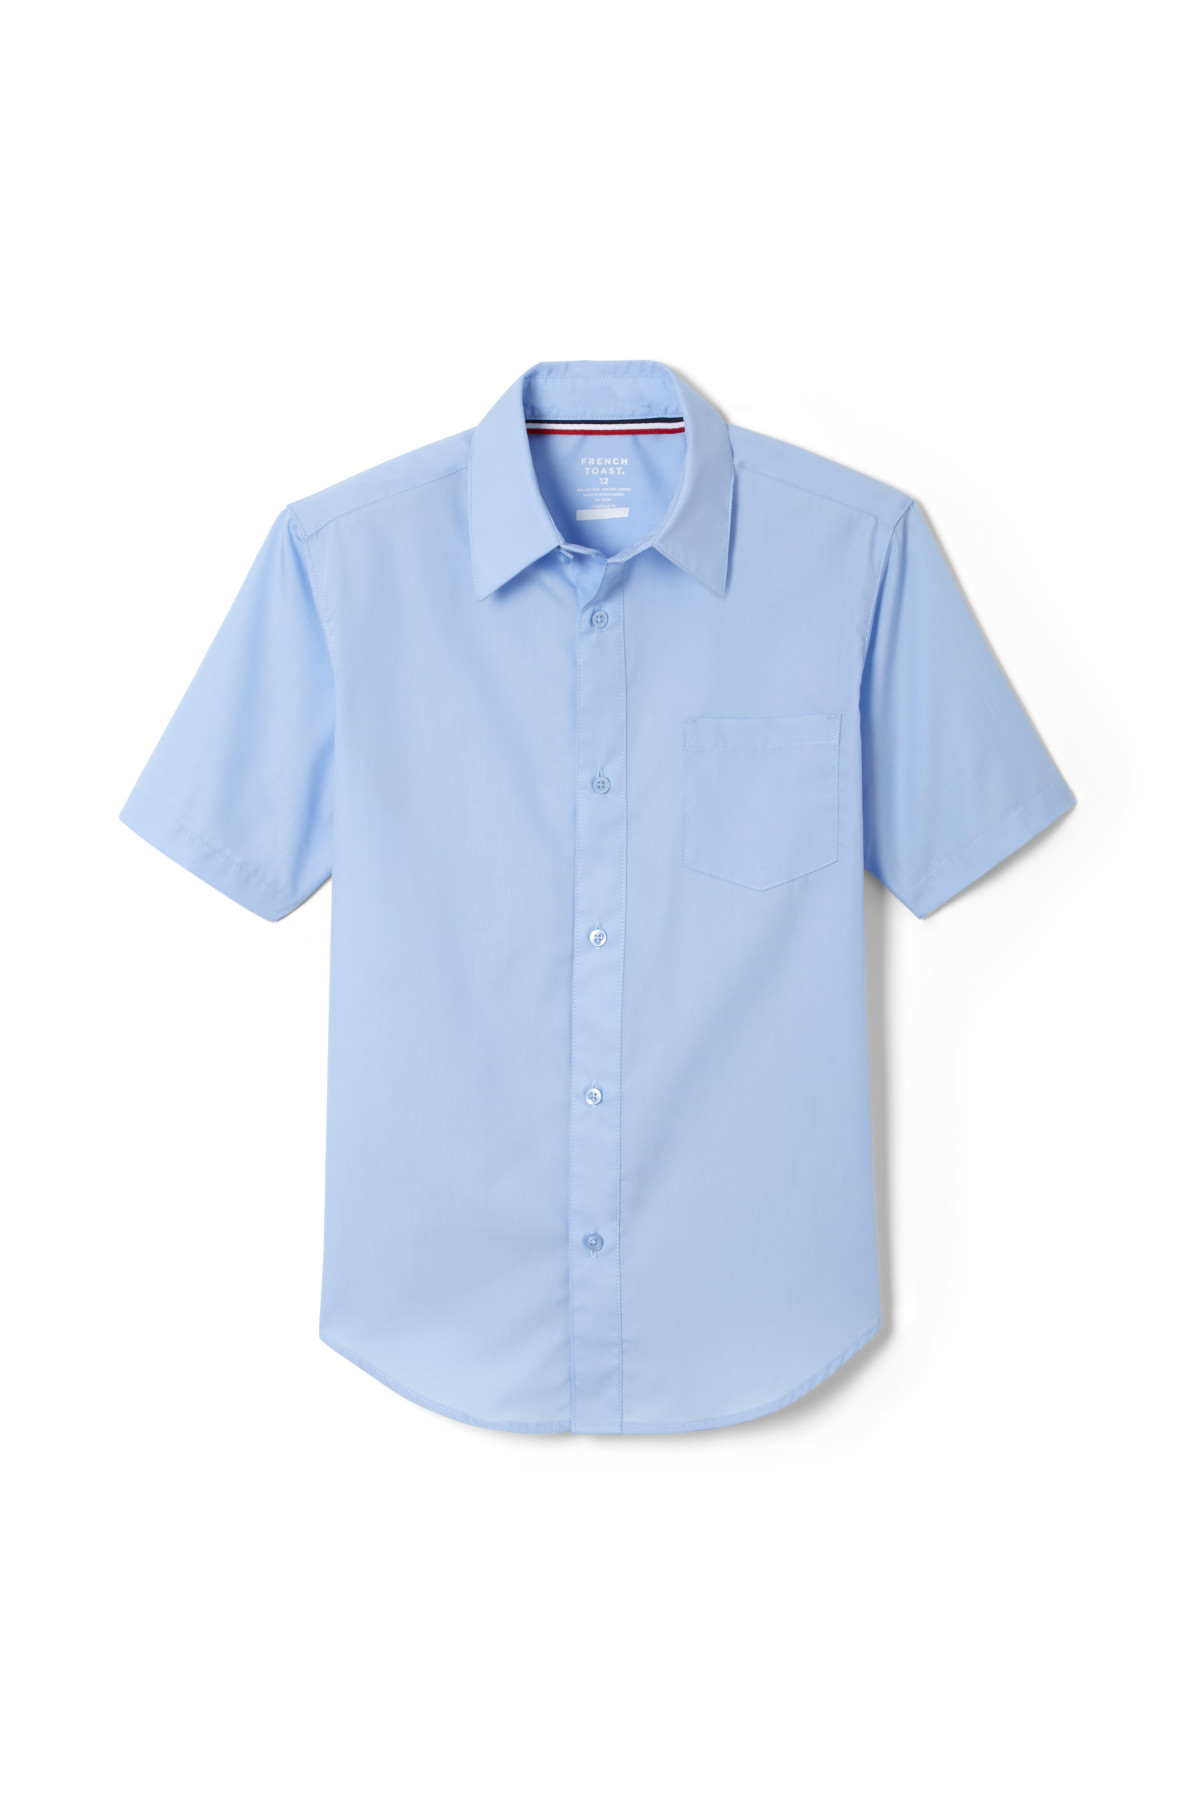 Blue Short Sleeve Shirt with Expandable Collar - French Toast